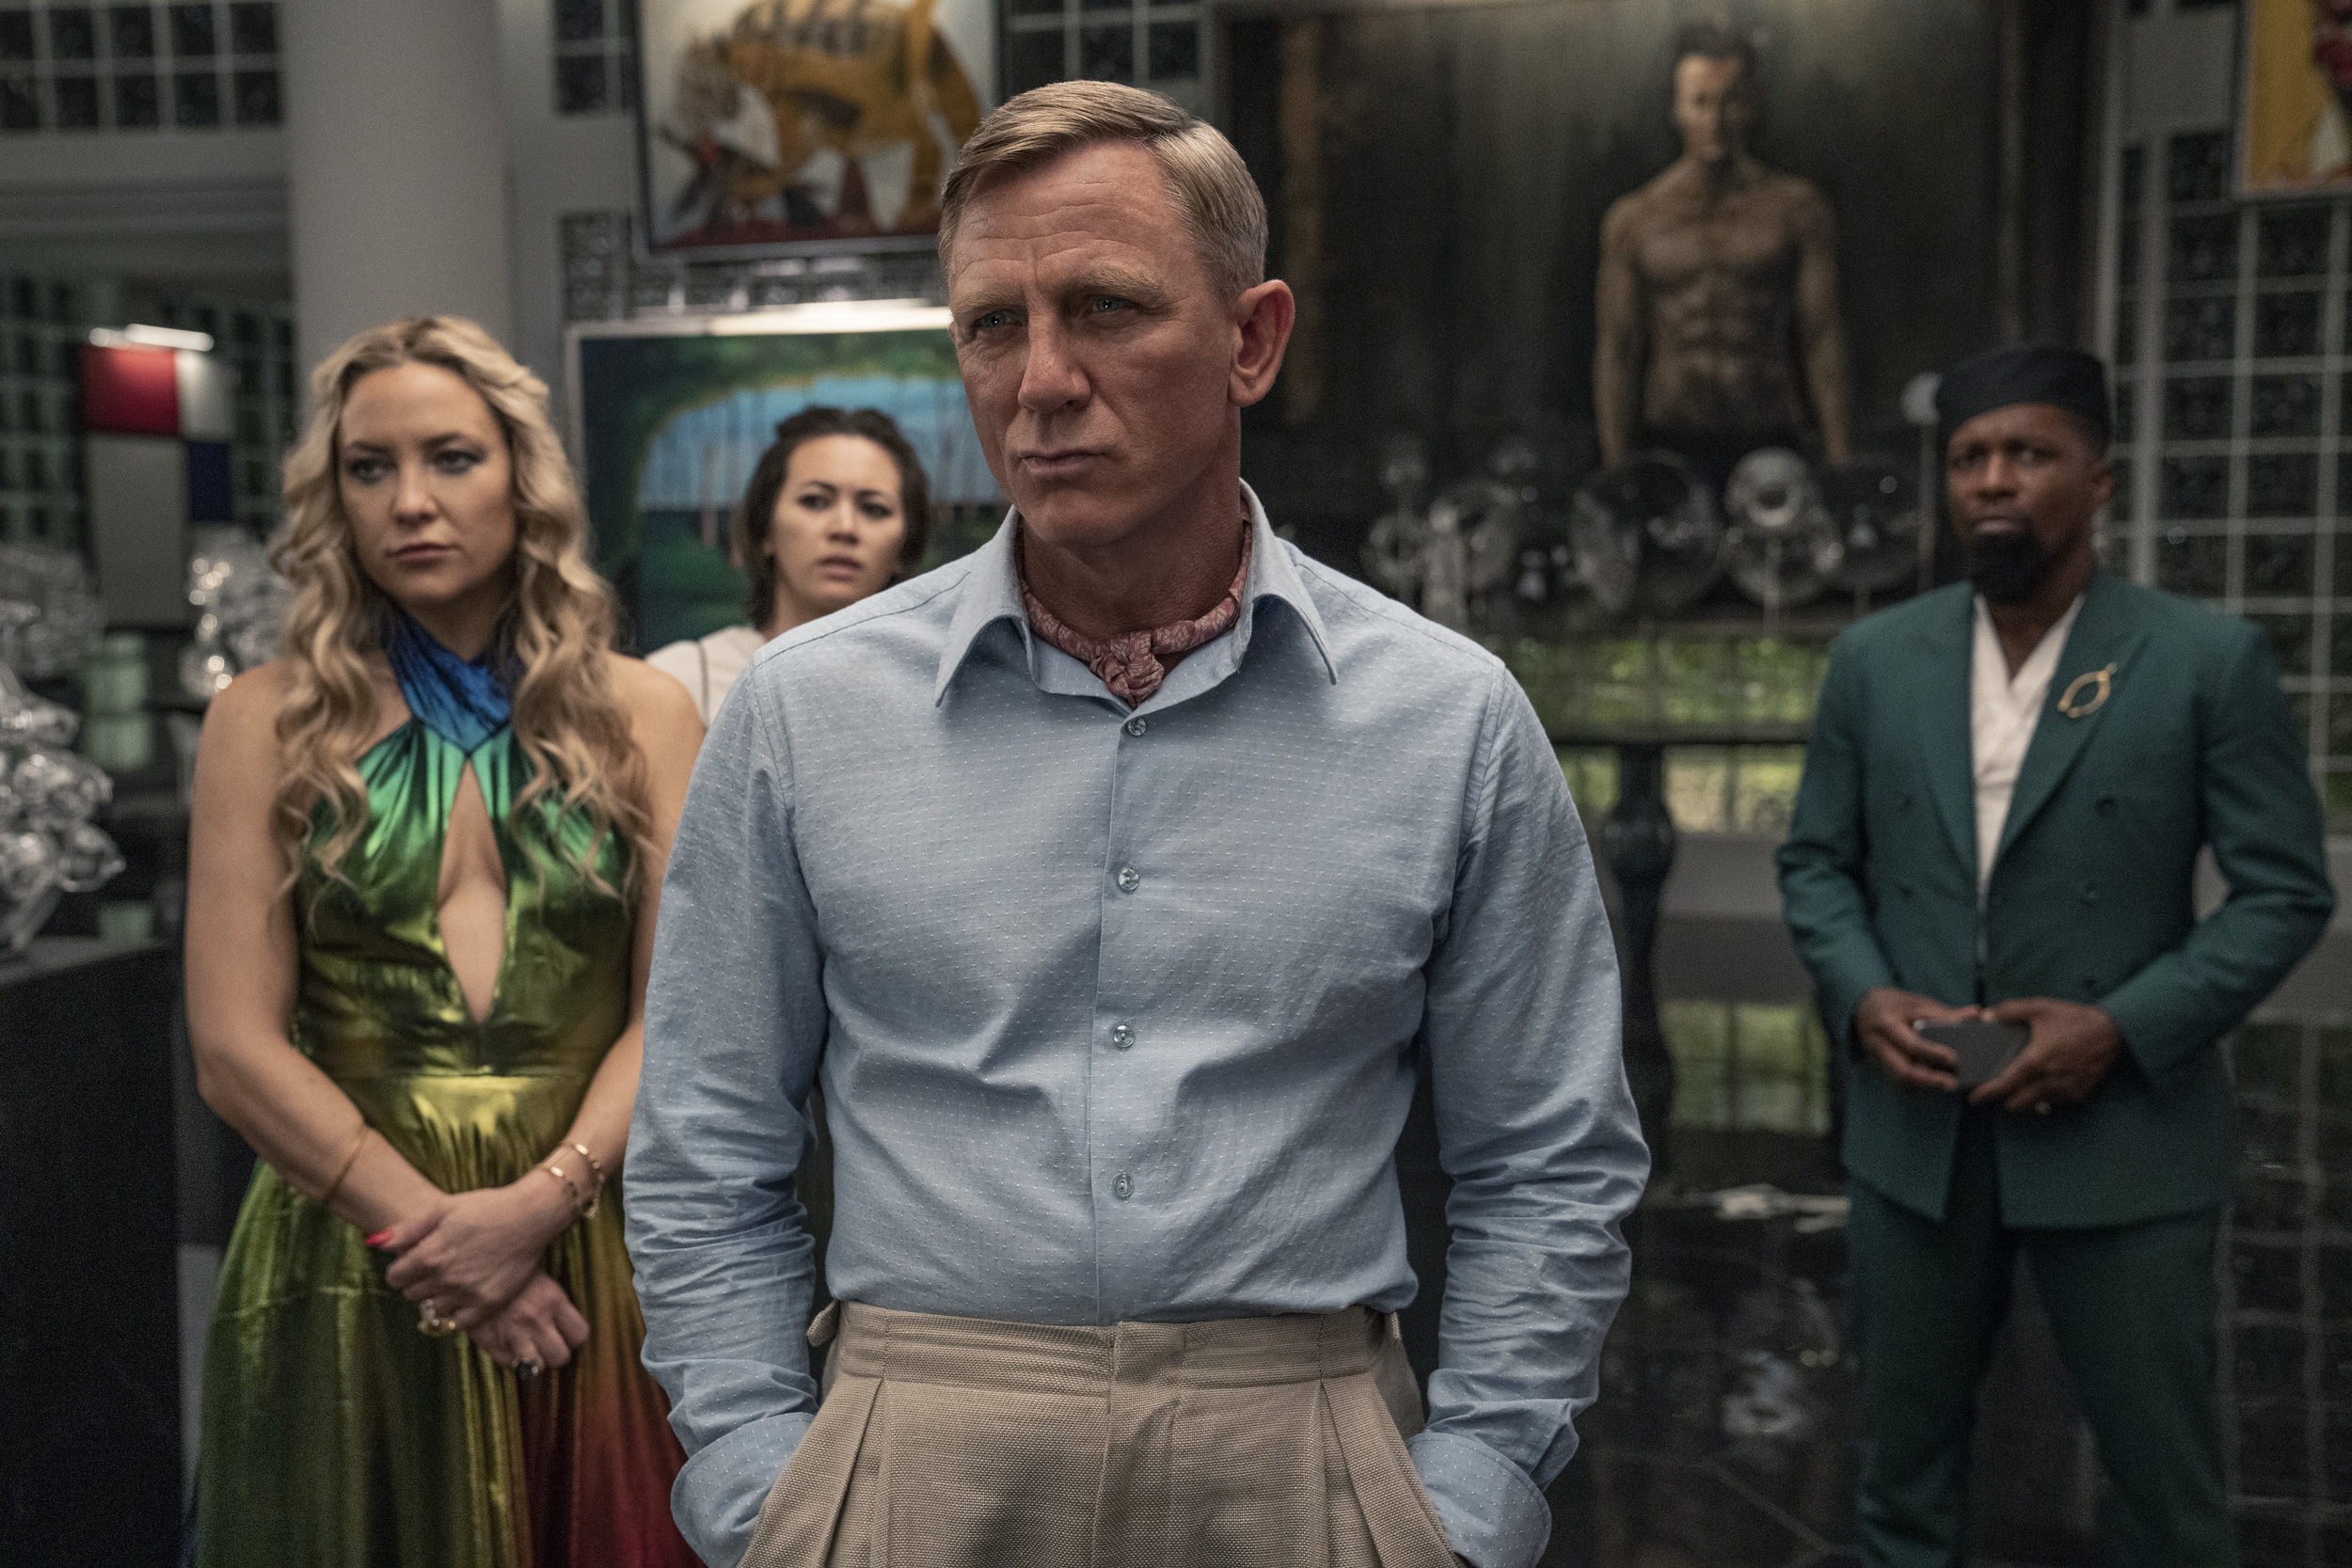 <p><em>Glass Onion</em> is the sequel to Rian Johnson’s 2019 murder mystery <em>Knives Out</em>, with Daniel Craig reprising his role as detective Benoit Blanc. Blanc is invited to a Greek island by billionaire Miles Brown, along with Brown’s eccentric wealthy friends. Like in any whodunnit, someone turns up dead, and our detective must solve the case. Featuring an all-star cast, the film has the perfect balance of thrills and laughs and keeps its audience guessing until the end. </p><p><a href='https://www.msn.com/en-us/community/channel/vid-cj9pqbr0vn9in2b6ddcd8sfgpfq6x6utp44fssrv6mc2gtybw0us'>Follow us on MSN to see more of our exclusive entertainment content.</a></p>